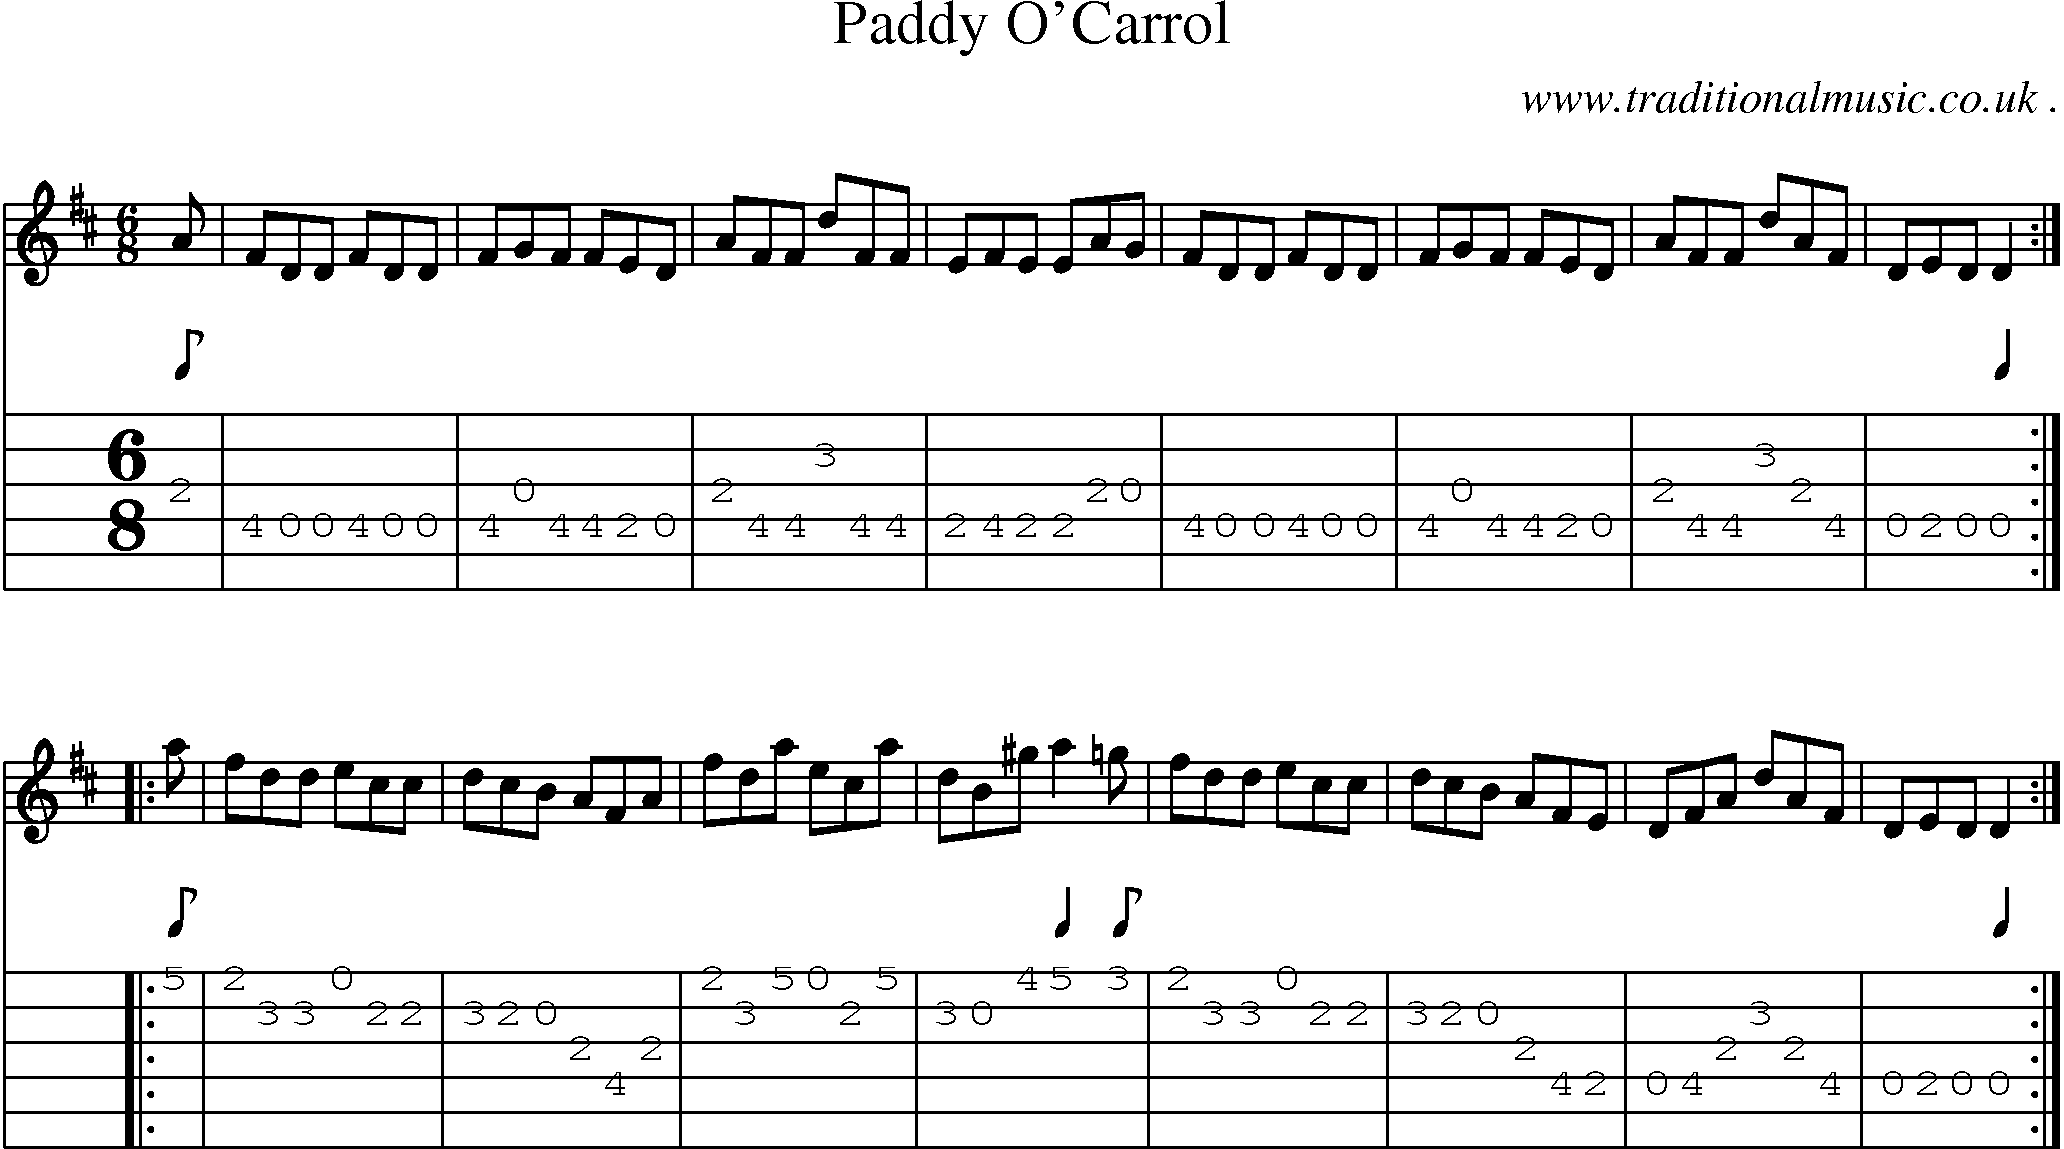 Sheet-music  score, Chords and Guitar Tabs for Paddy Ocarrol